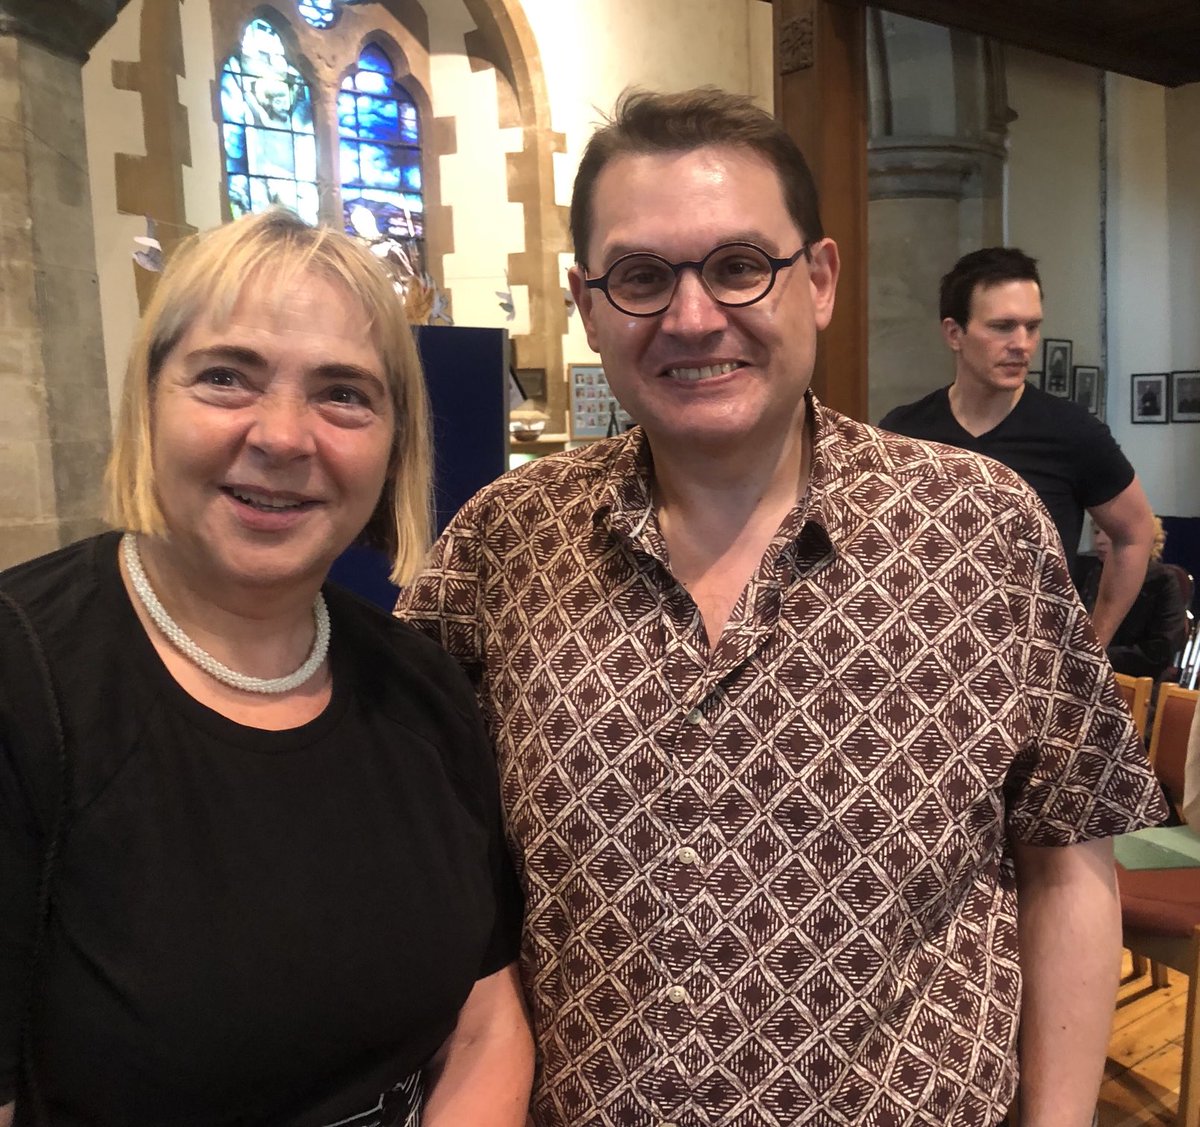 This afternoon I met one of my all time musical heroes @paulMealor at the Sounds Baroque Concert at St Leonard’s church in Hythe, the finale of #JamOnTheMarsh. Among his many honours, Paul is President of ⁦@JAMontheMarsh⁩ 
What a splendid festival.